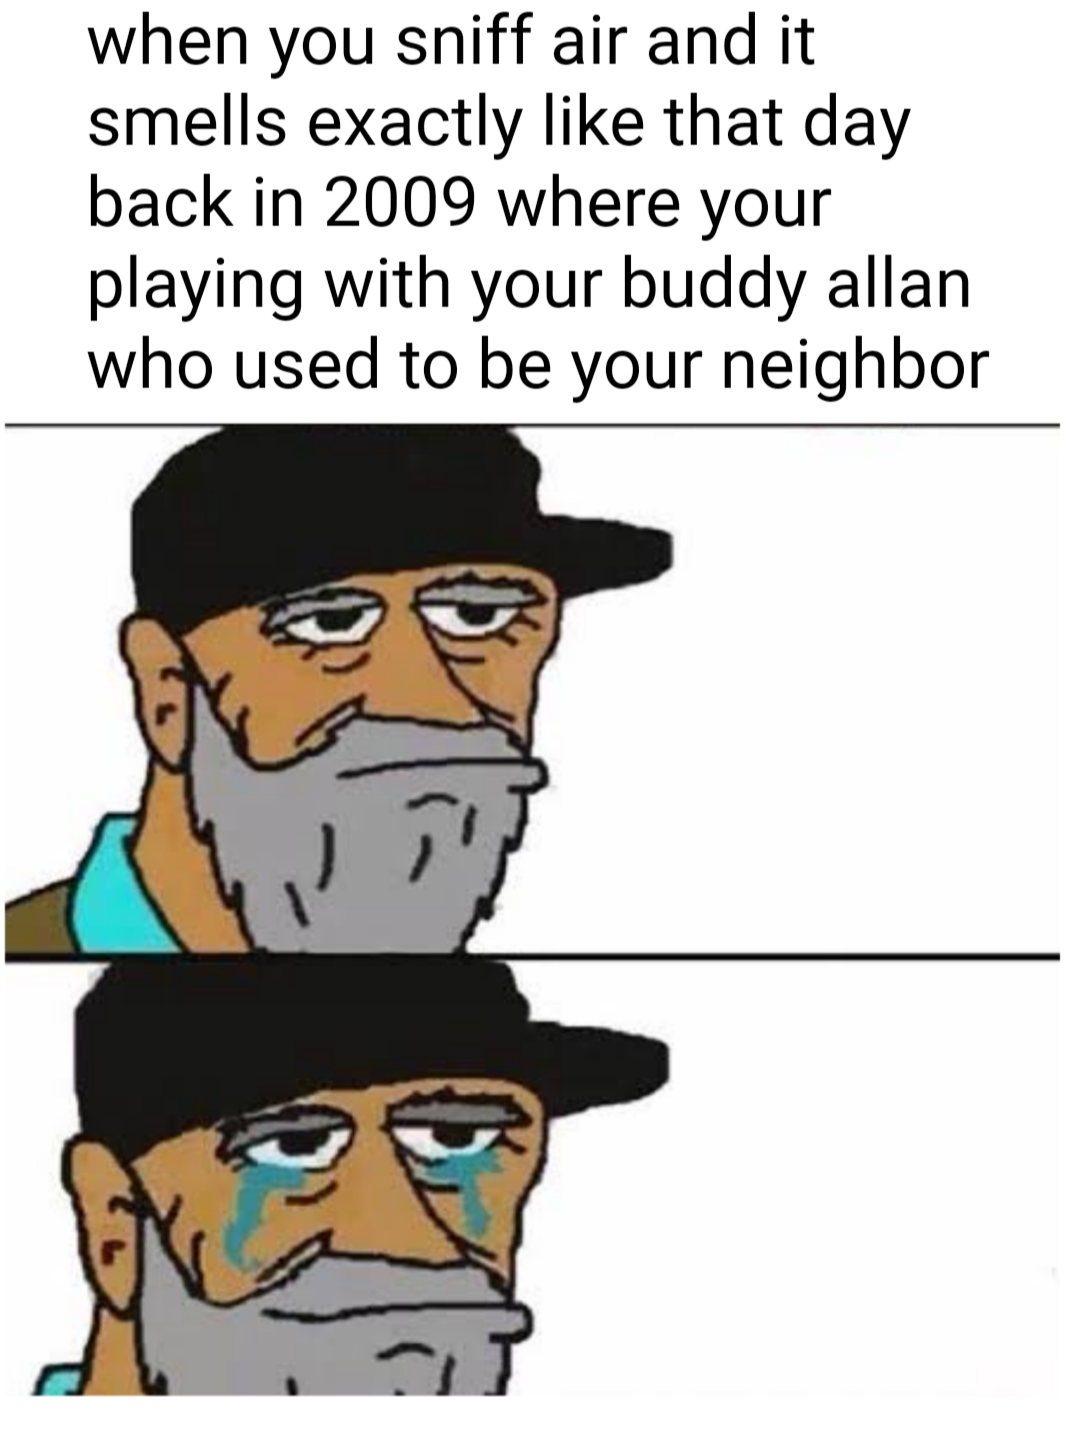 hilarious memes - ohhh elden ring - when you sniff air and it smells exactly that day back in 2009 where your playing with your buddy allan who used to be your neighbor